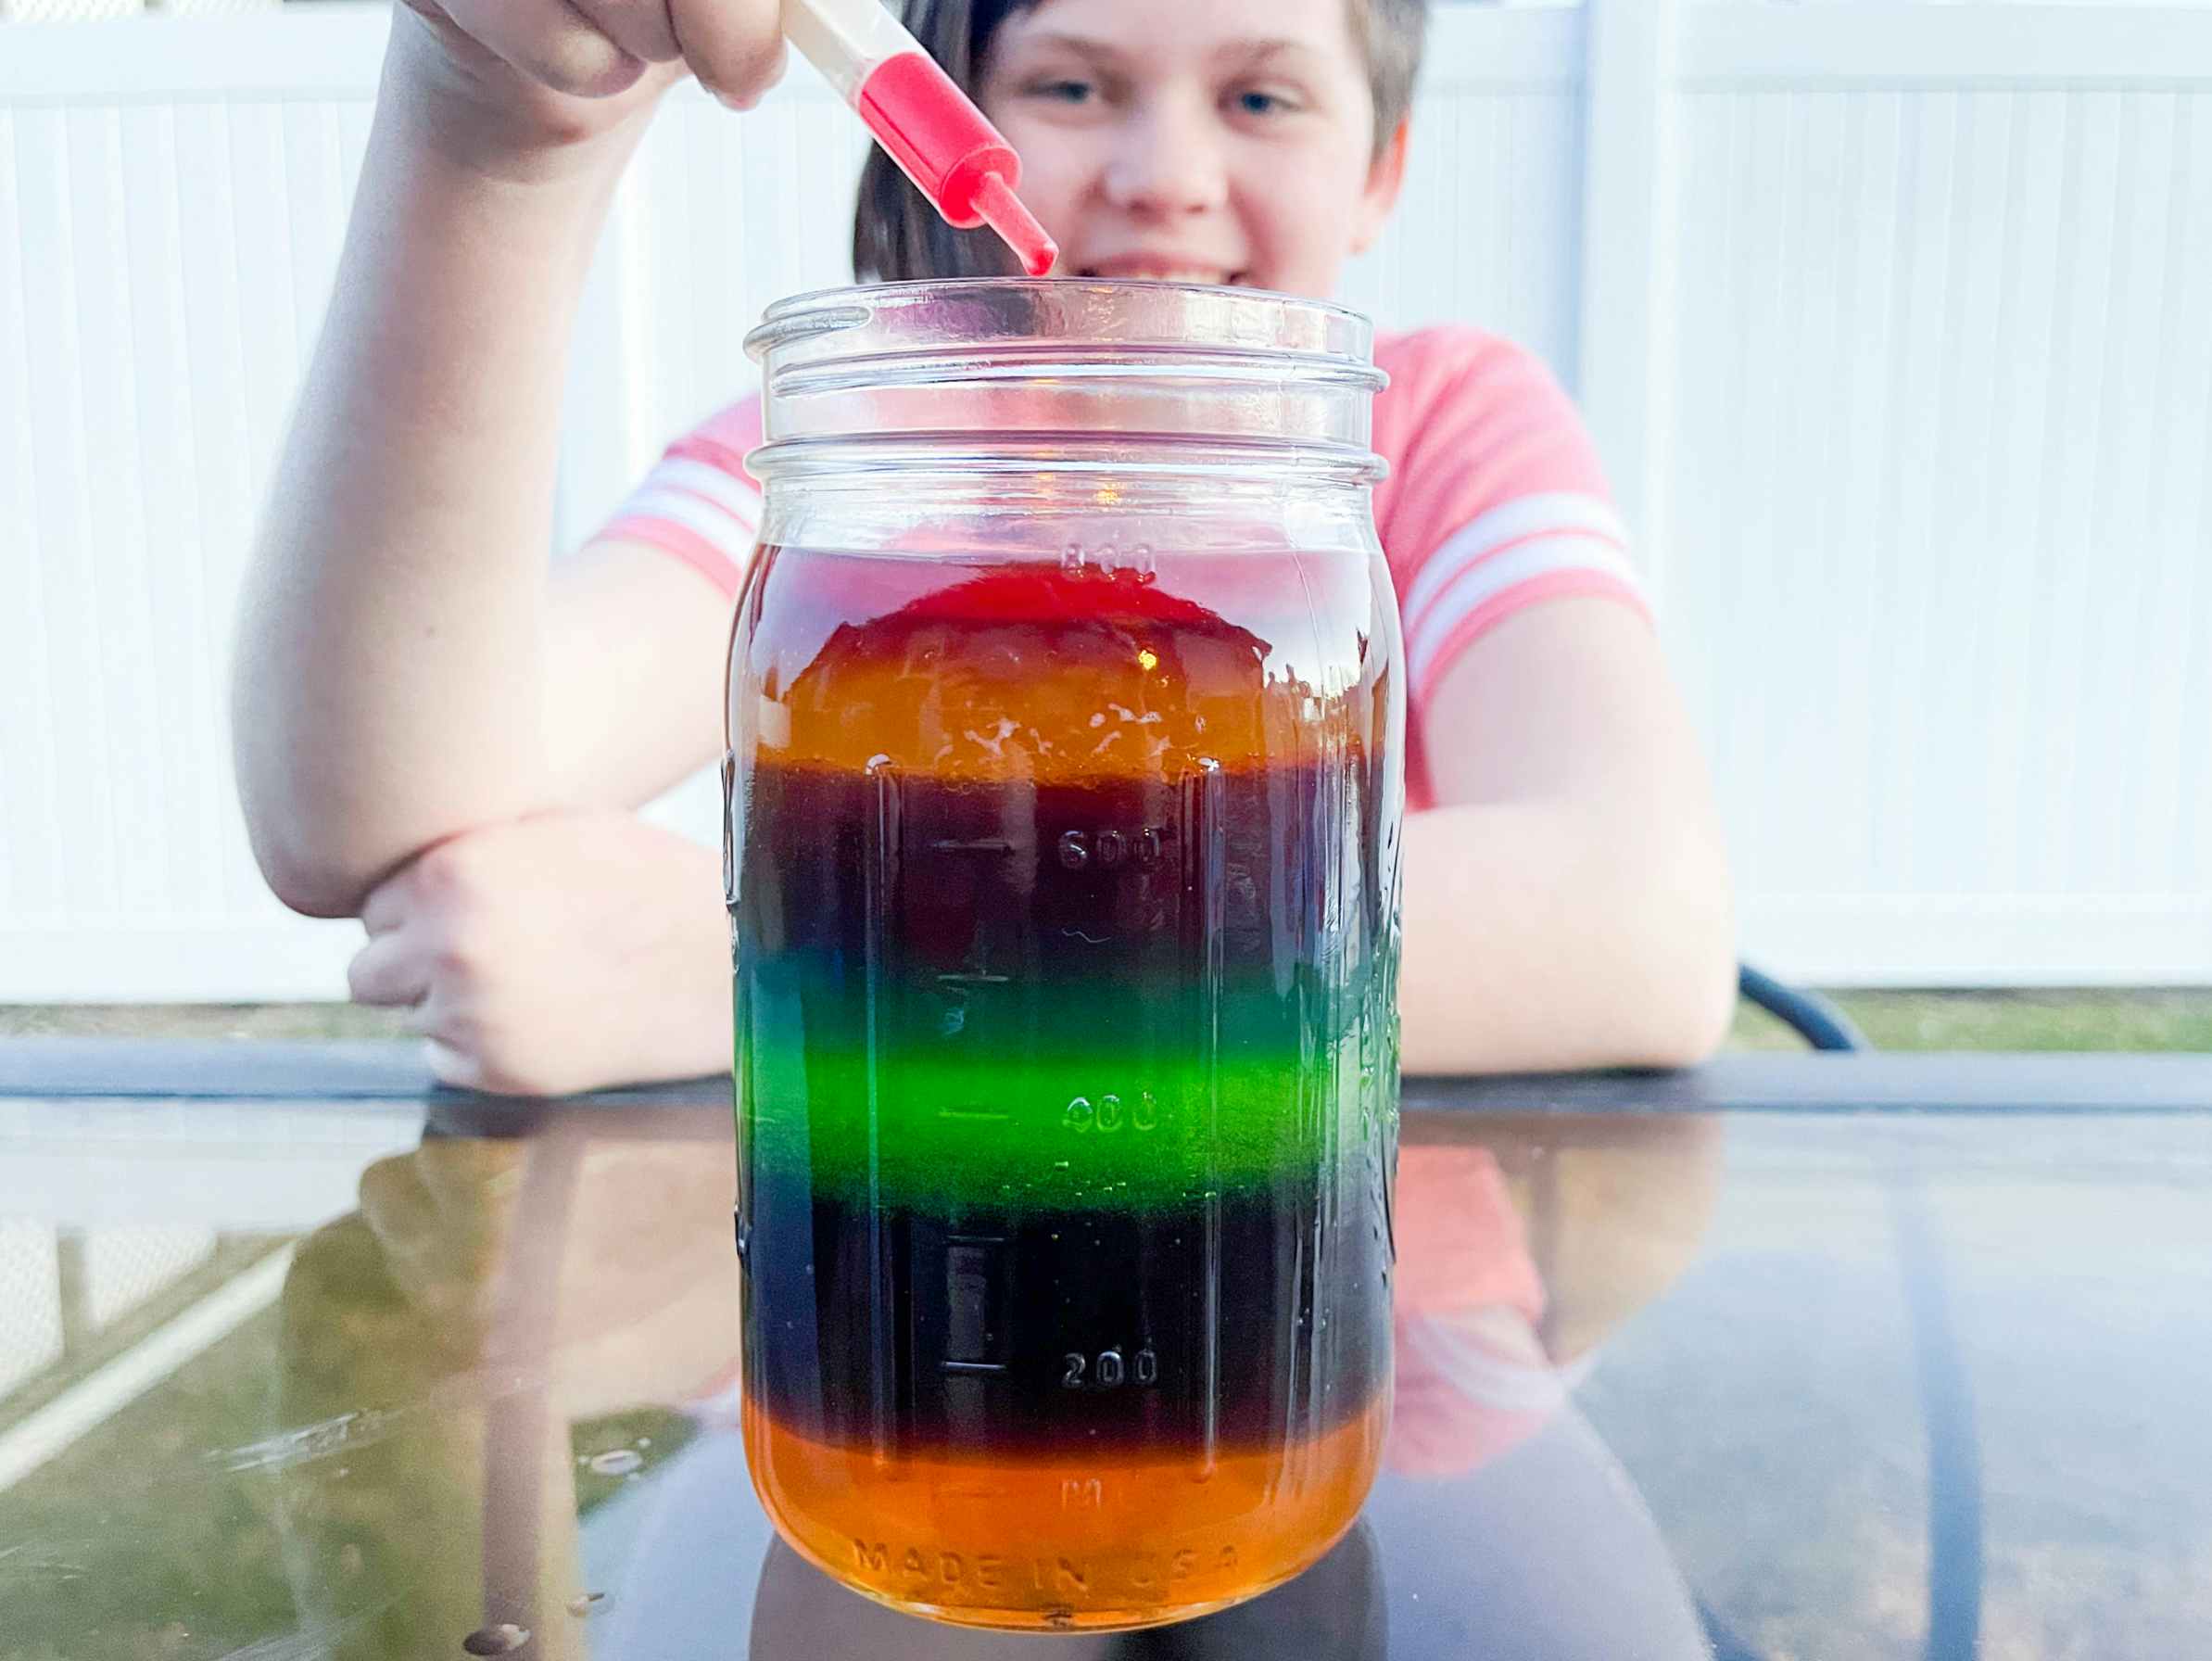 Fun Summer Science Project For Kids: Homemade Slime!